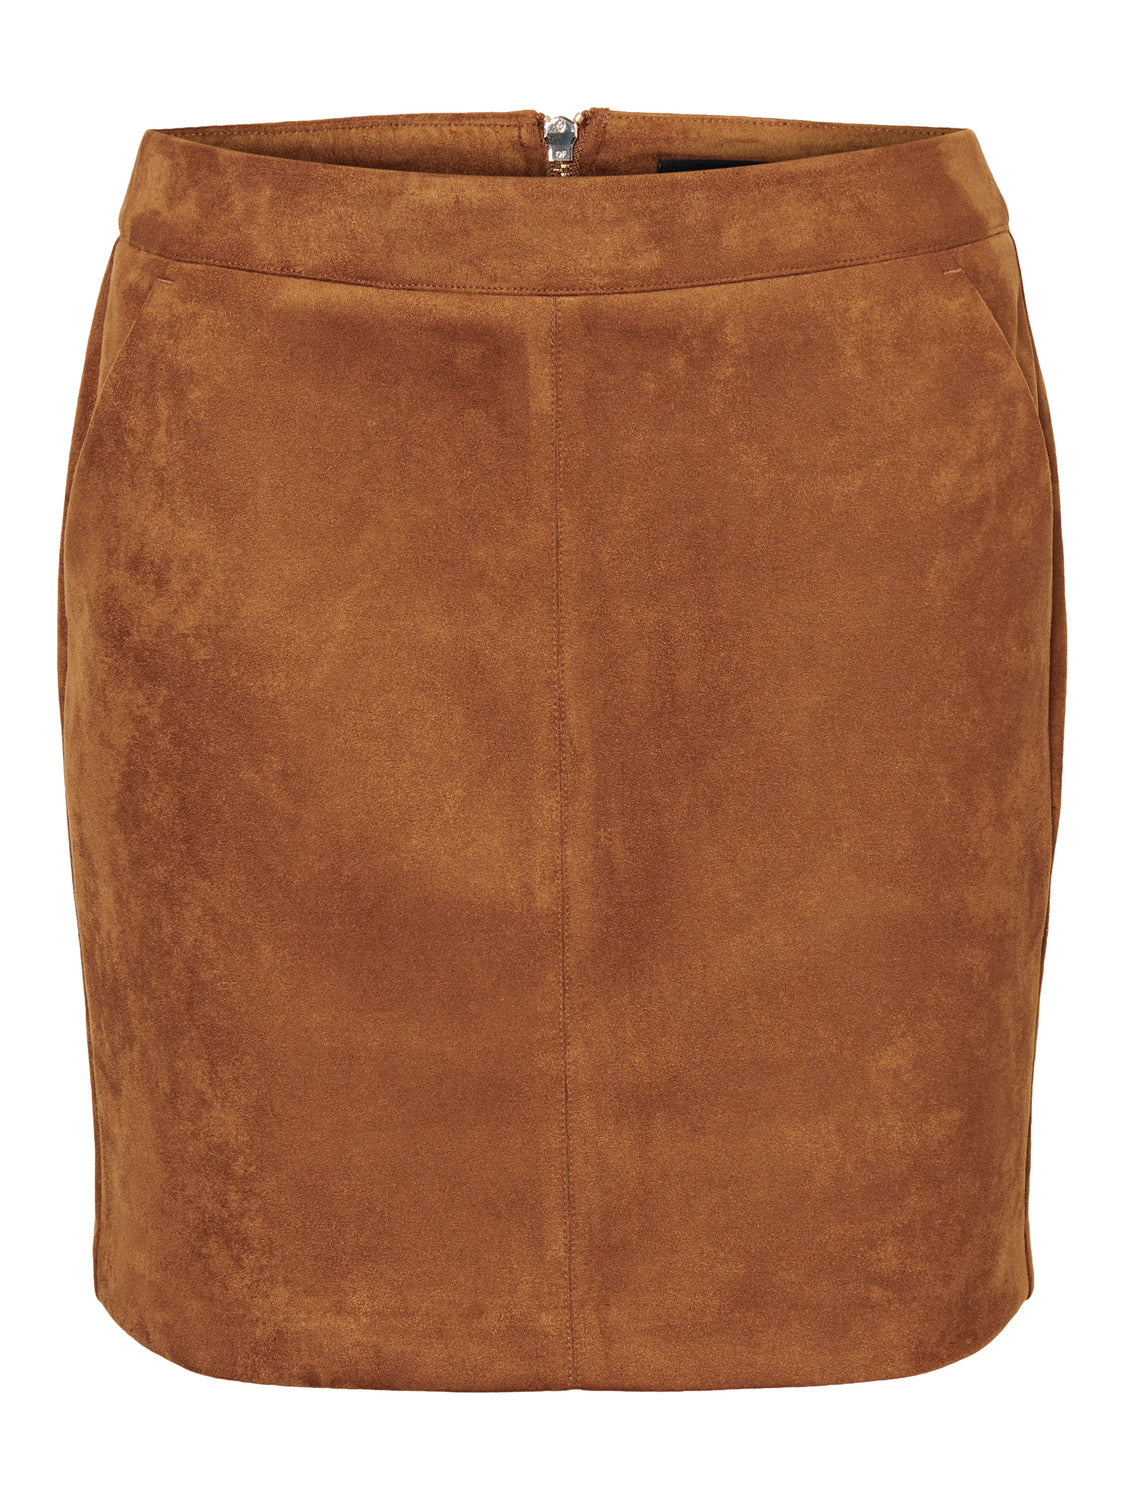 Faux Suede skirt, petite